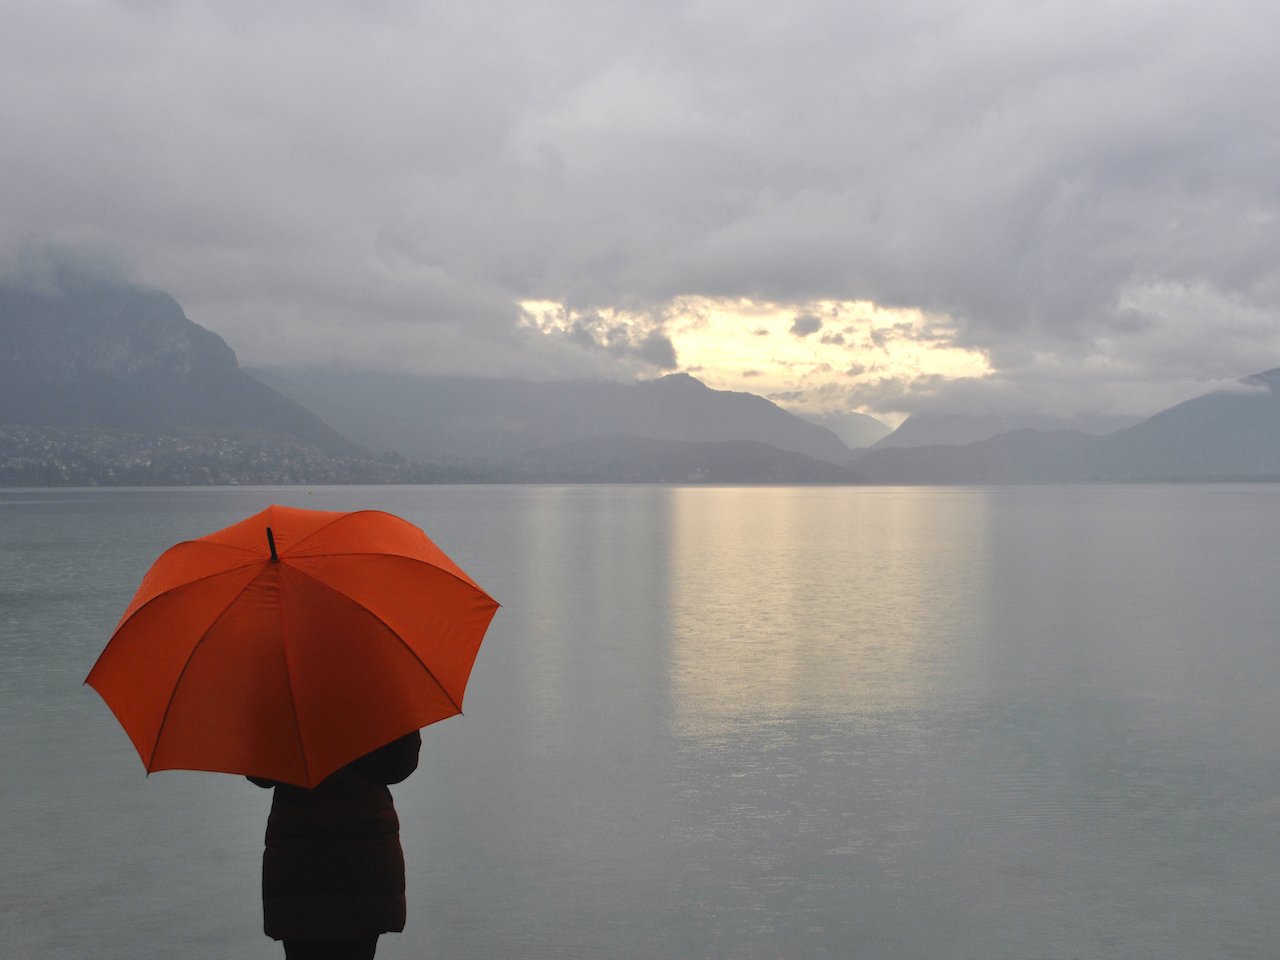 A woman under a red umbrella watches the sun rise through the clouds